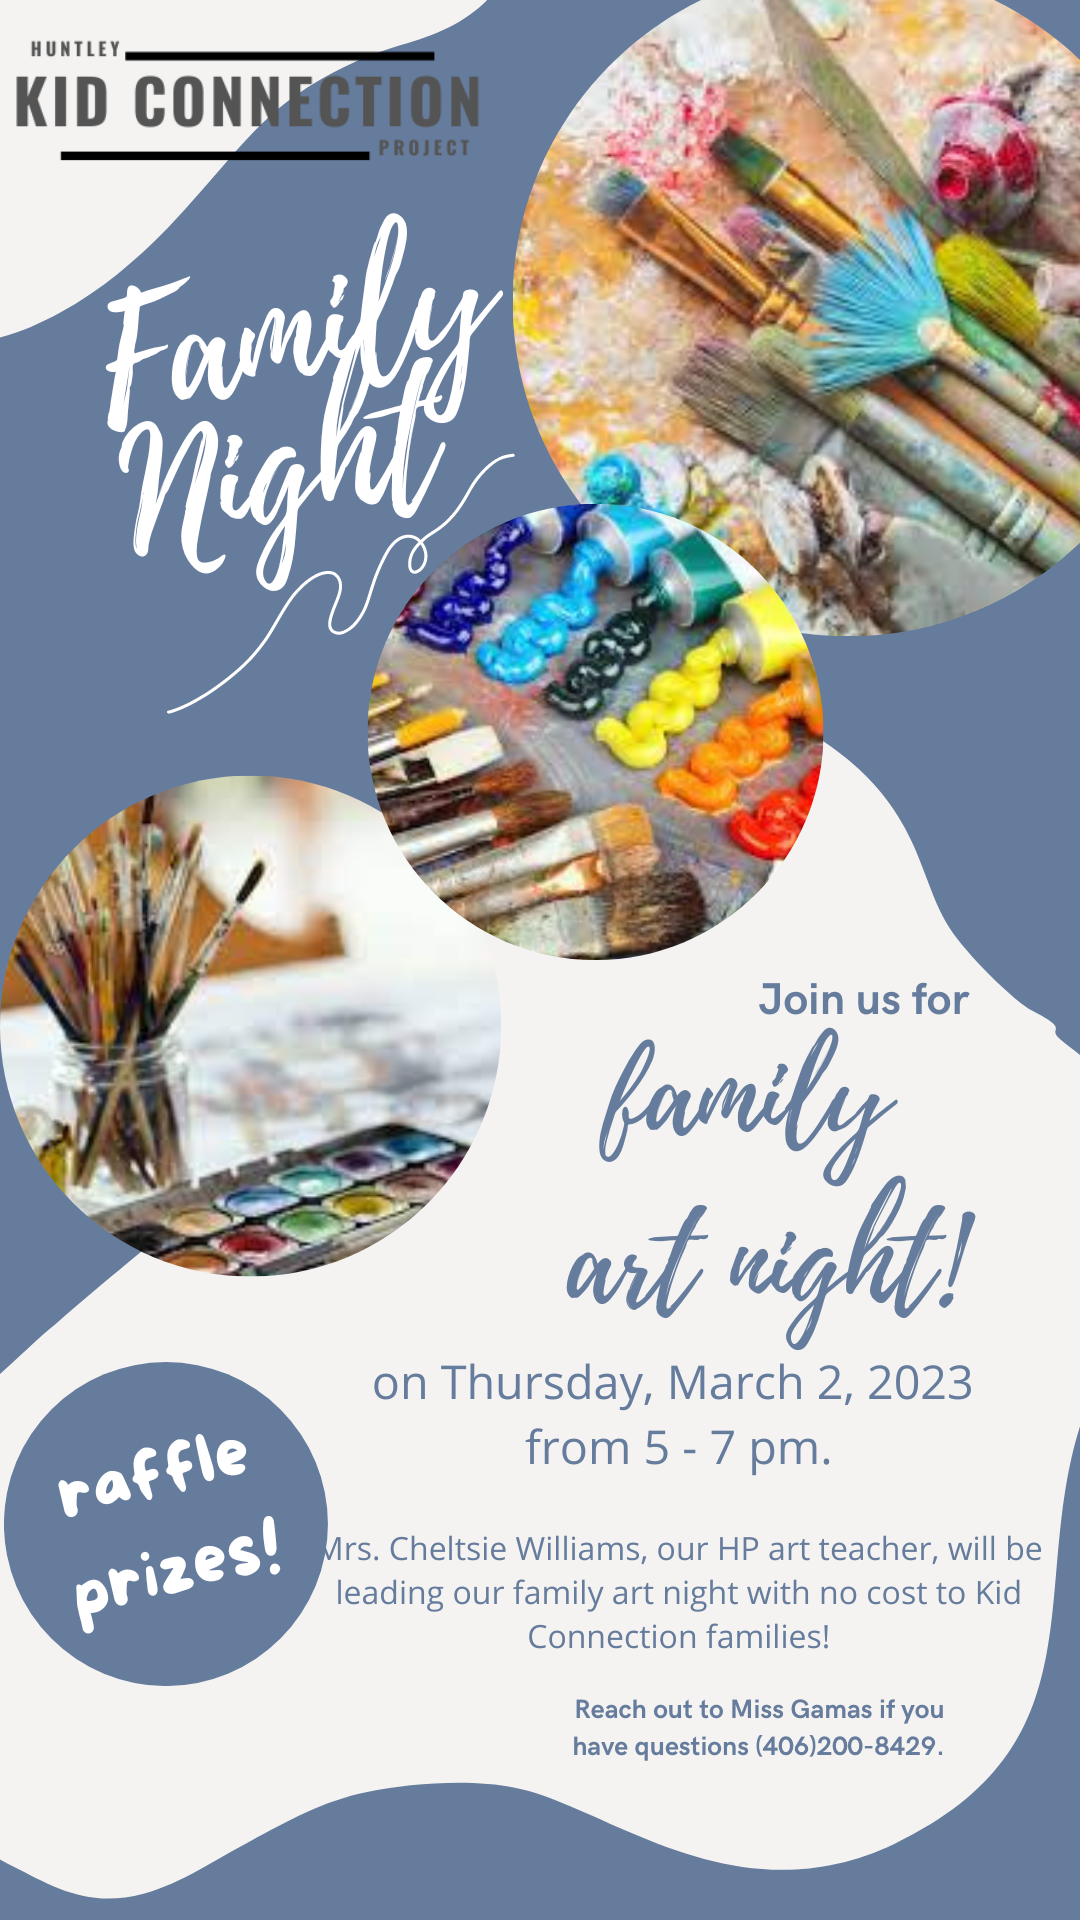 HUNTLEY, KID CONNECTION PROJECT Family Vigi raffle prizes! Join us for farily art night! on Thursday, March 2, 2023 from 5 - 7 pm. Mrs. Cheltsie Williams, our HP art teacher, will be leading our family art night with no cost to Kid Connection families! Reach out to Miss Gamas if you have questions